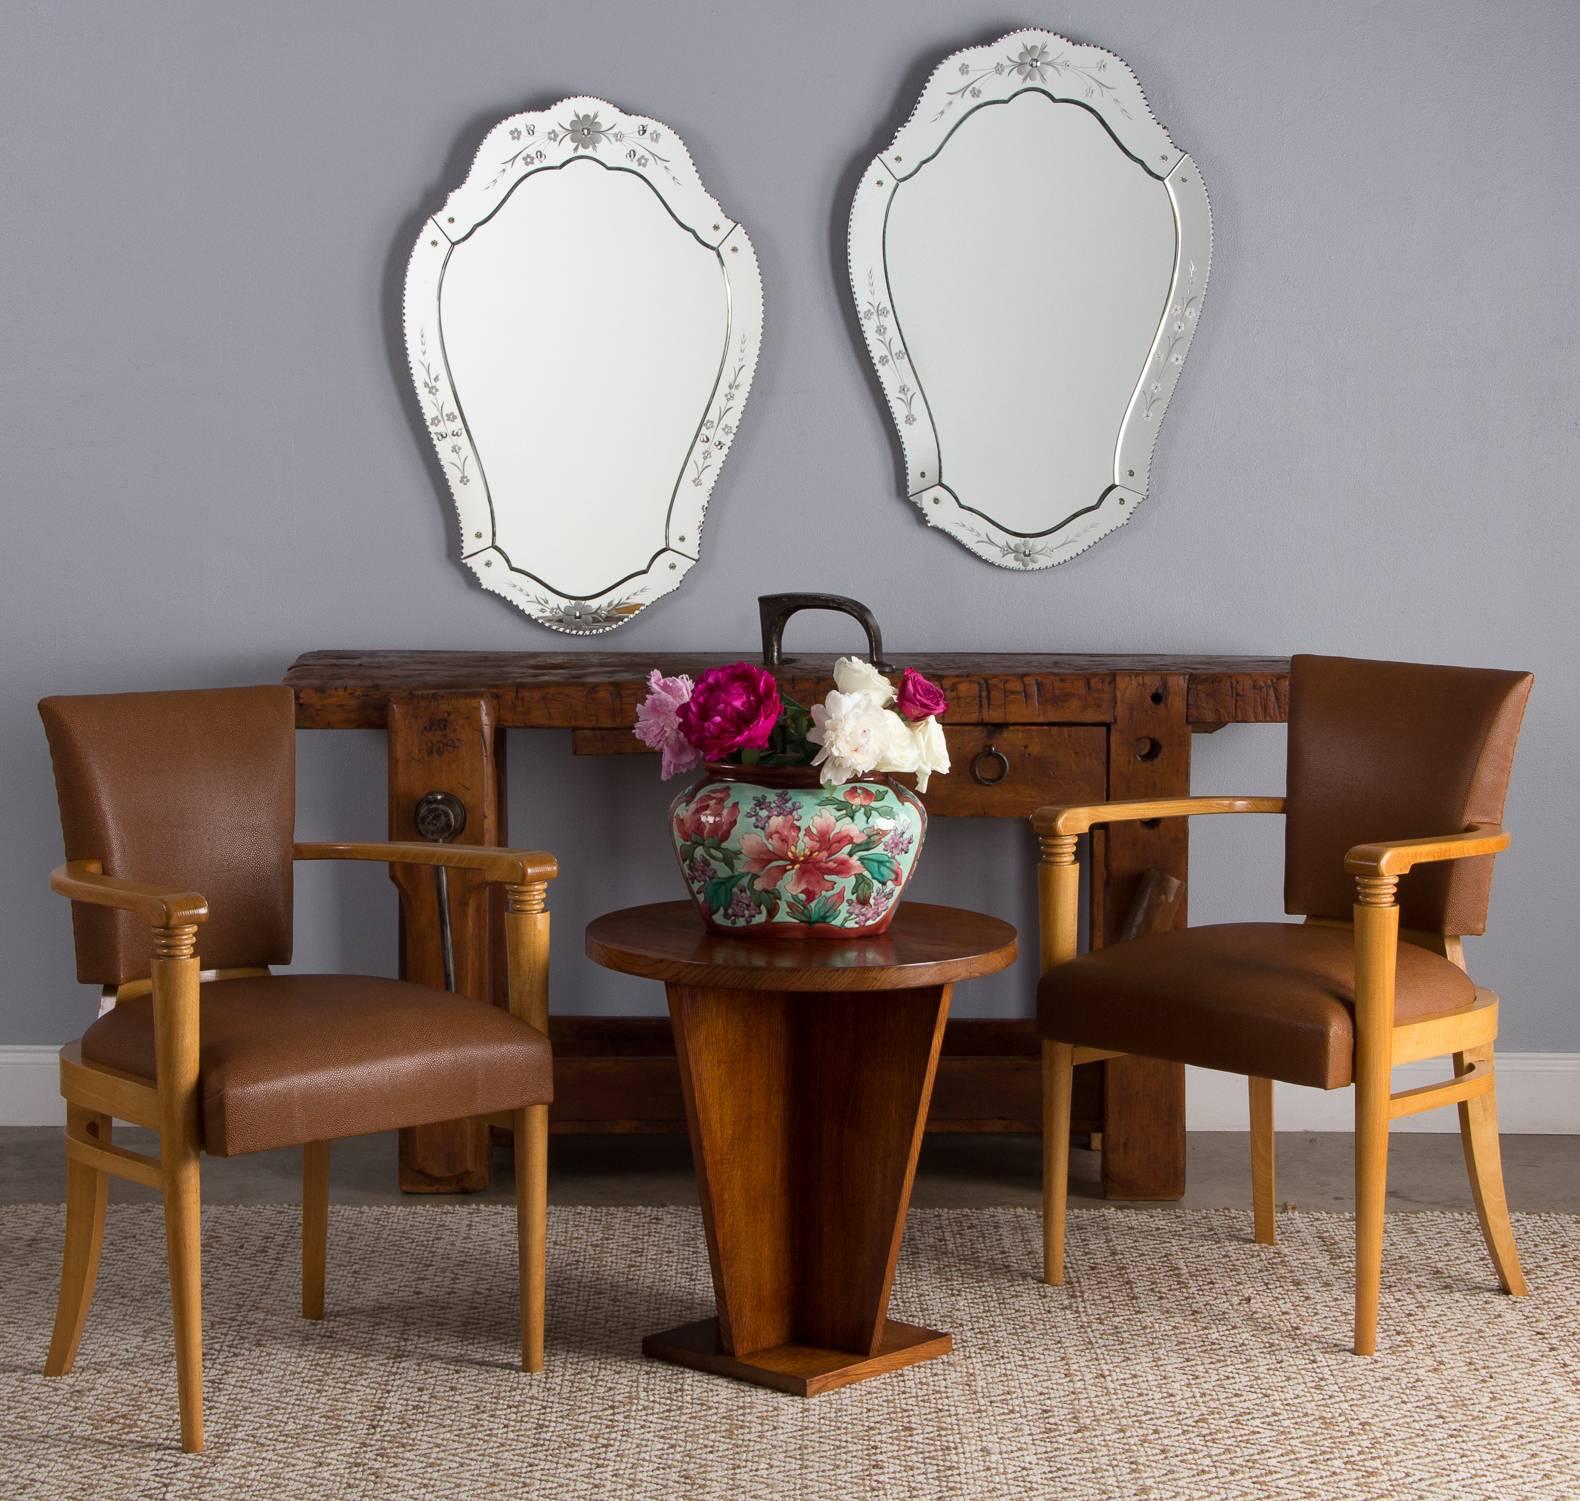 A pair of fancy vintage French Art Deco bridge chairs, circa 1930. High Art Deco shines through on the light-toned birch wood frames. The arms rest on tapered legs capped with a carved set of three graduated concentric rings. The back legs are